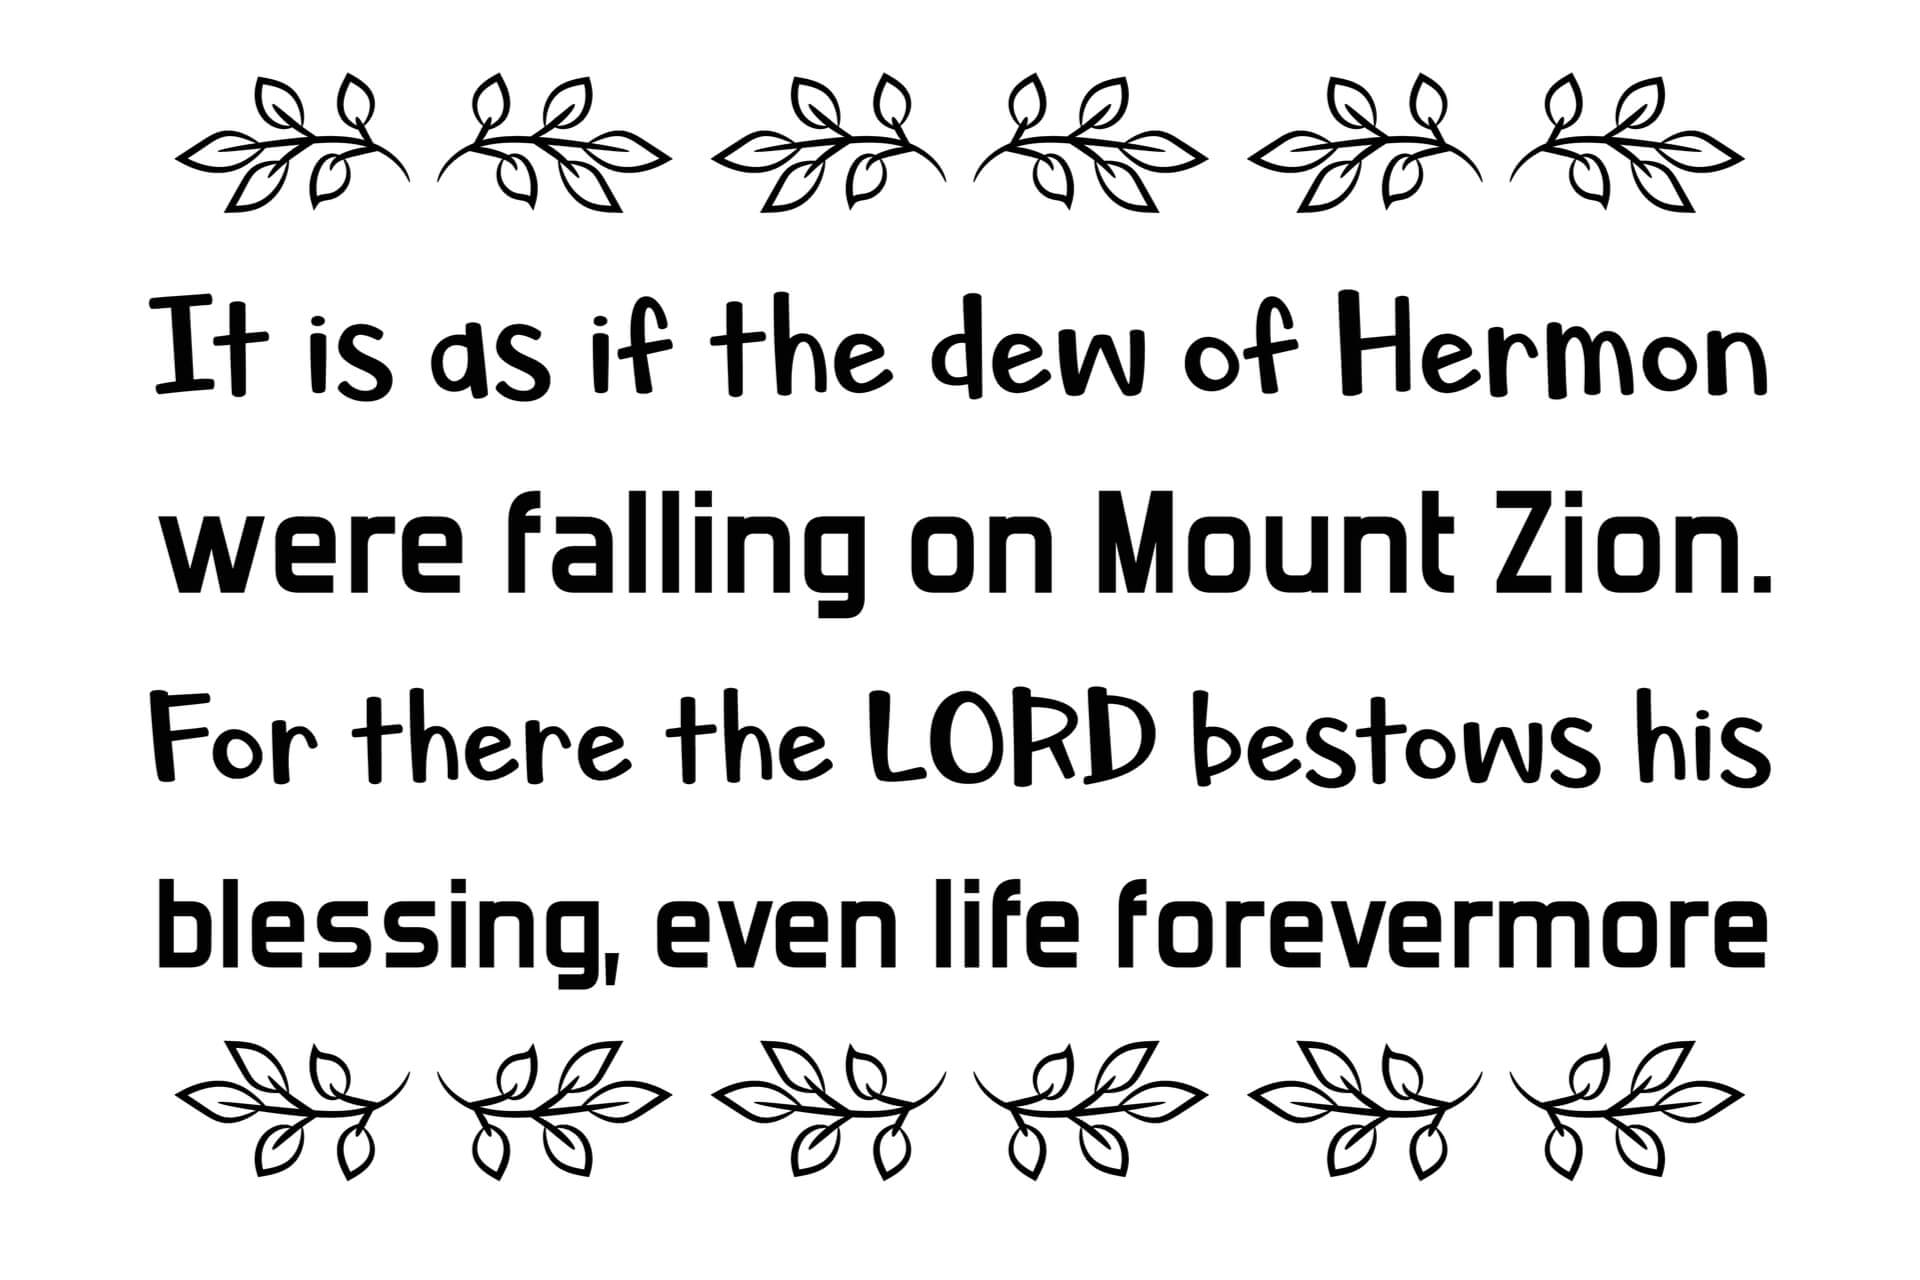 It is as if the dew of Hermon were falling on Mount Zion